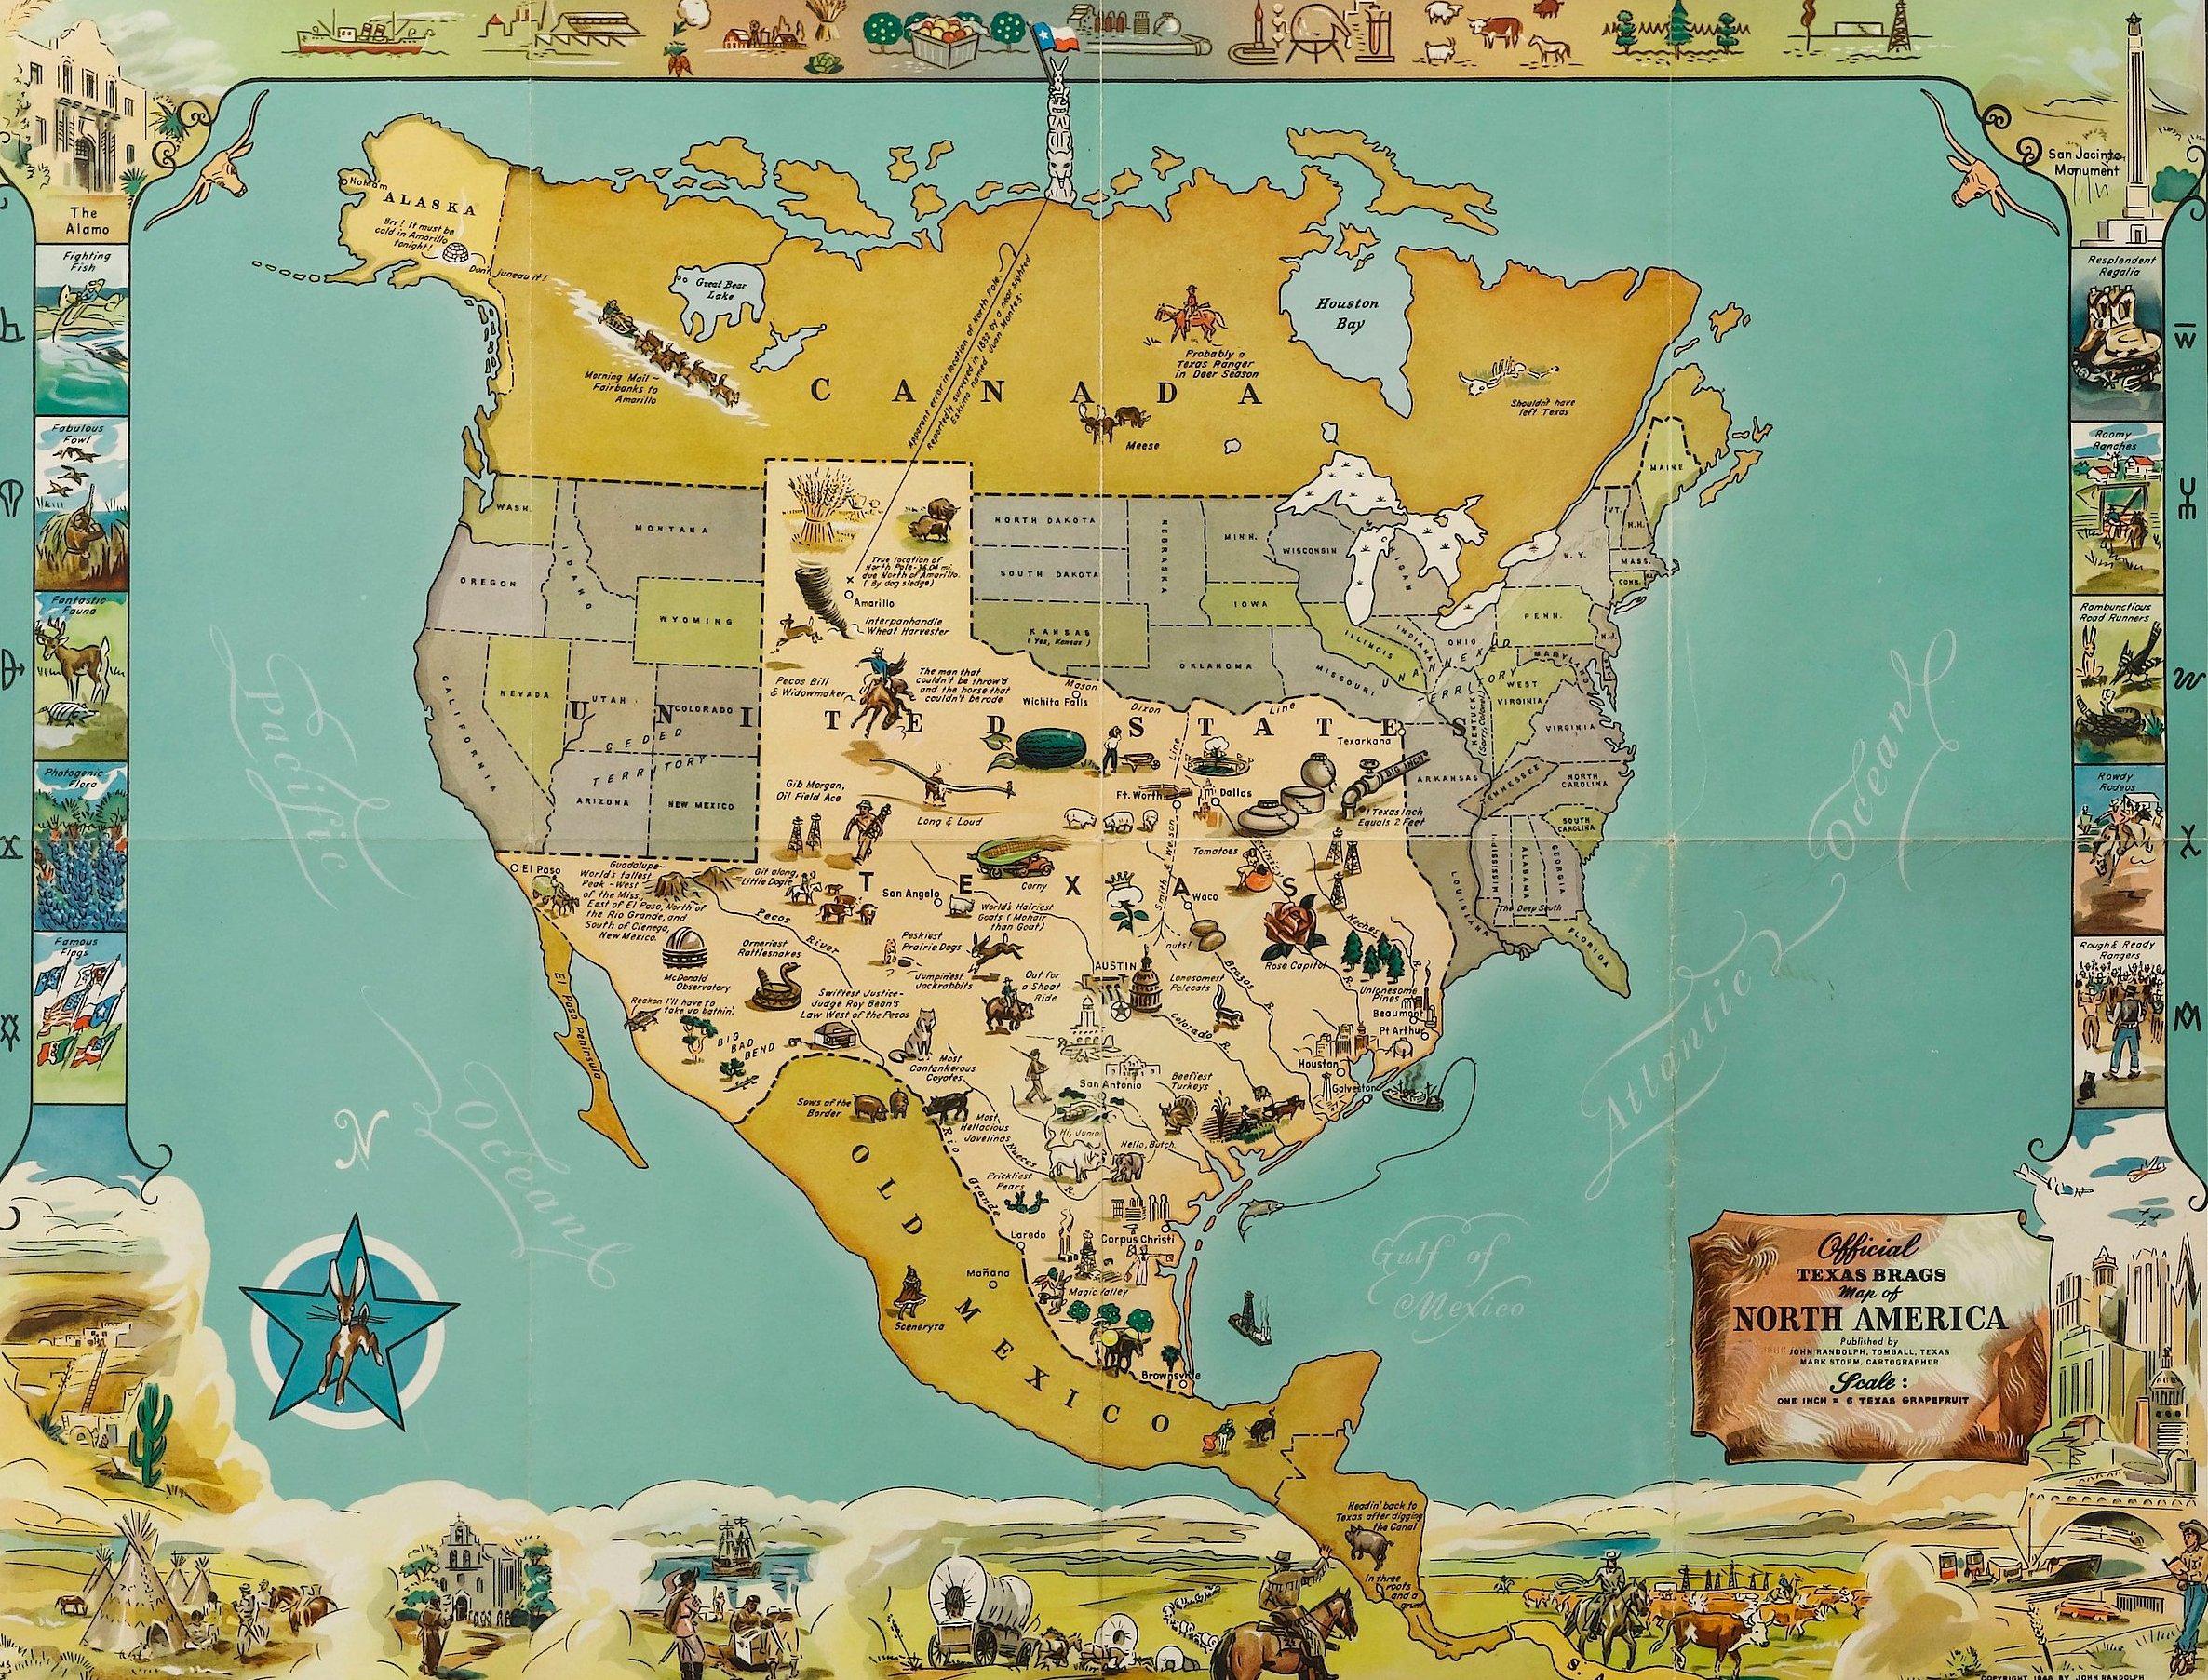 This is a uniquely Texas-centered, tongue-in-cheek map of the United States, published in 1948. The map reflects a massive Texas, prominently occupying the center and south of the United States, with all other states squeezed to the northeast and